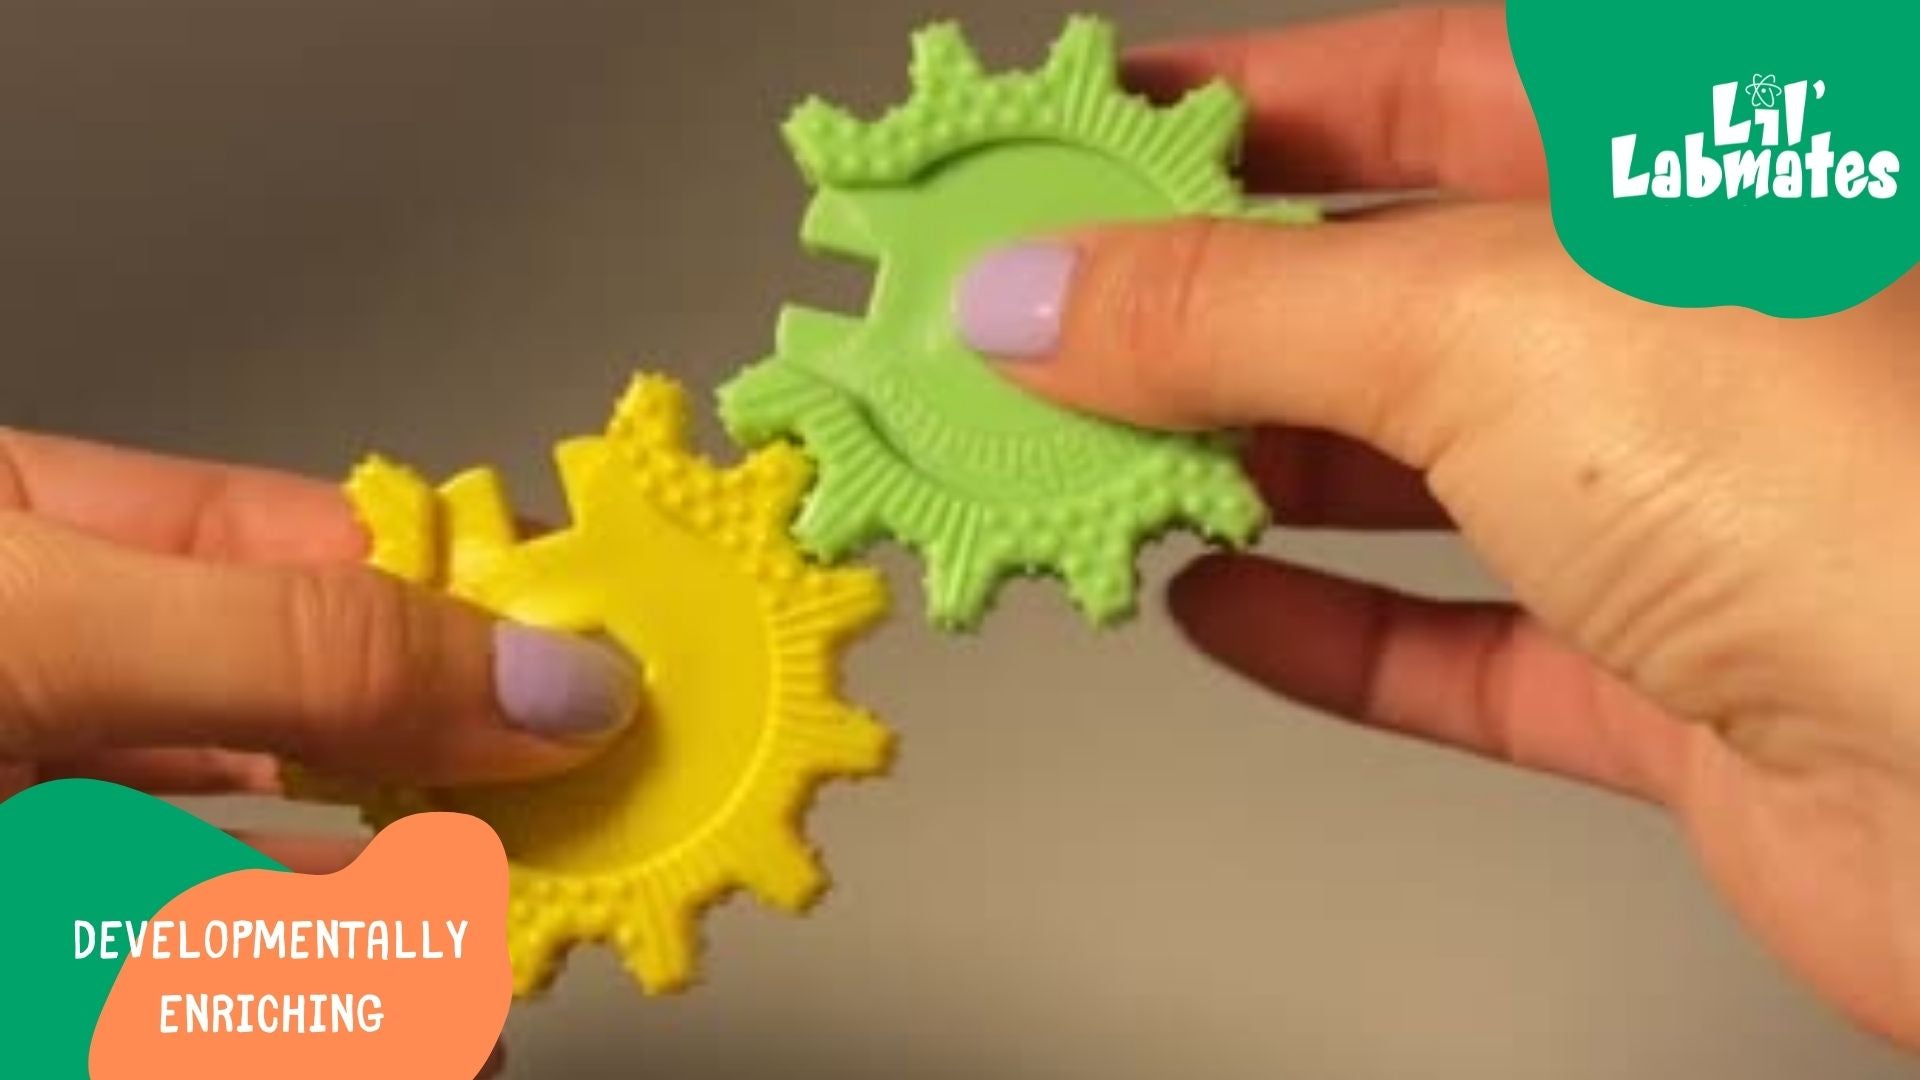 Load video: Wondering what developmental skills a baby can practice with the Interlocking Gears? Hand to hand passing, open grip, visual and auditory tracking, fine motor skills, and coordination